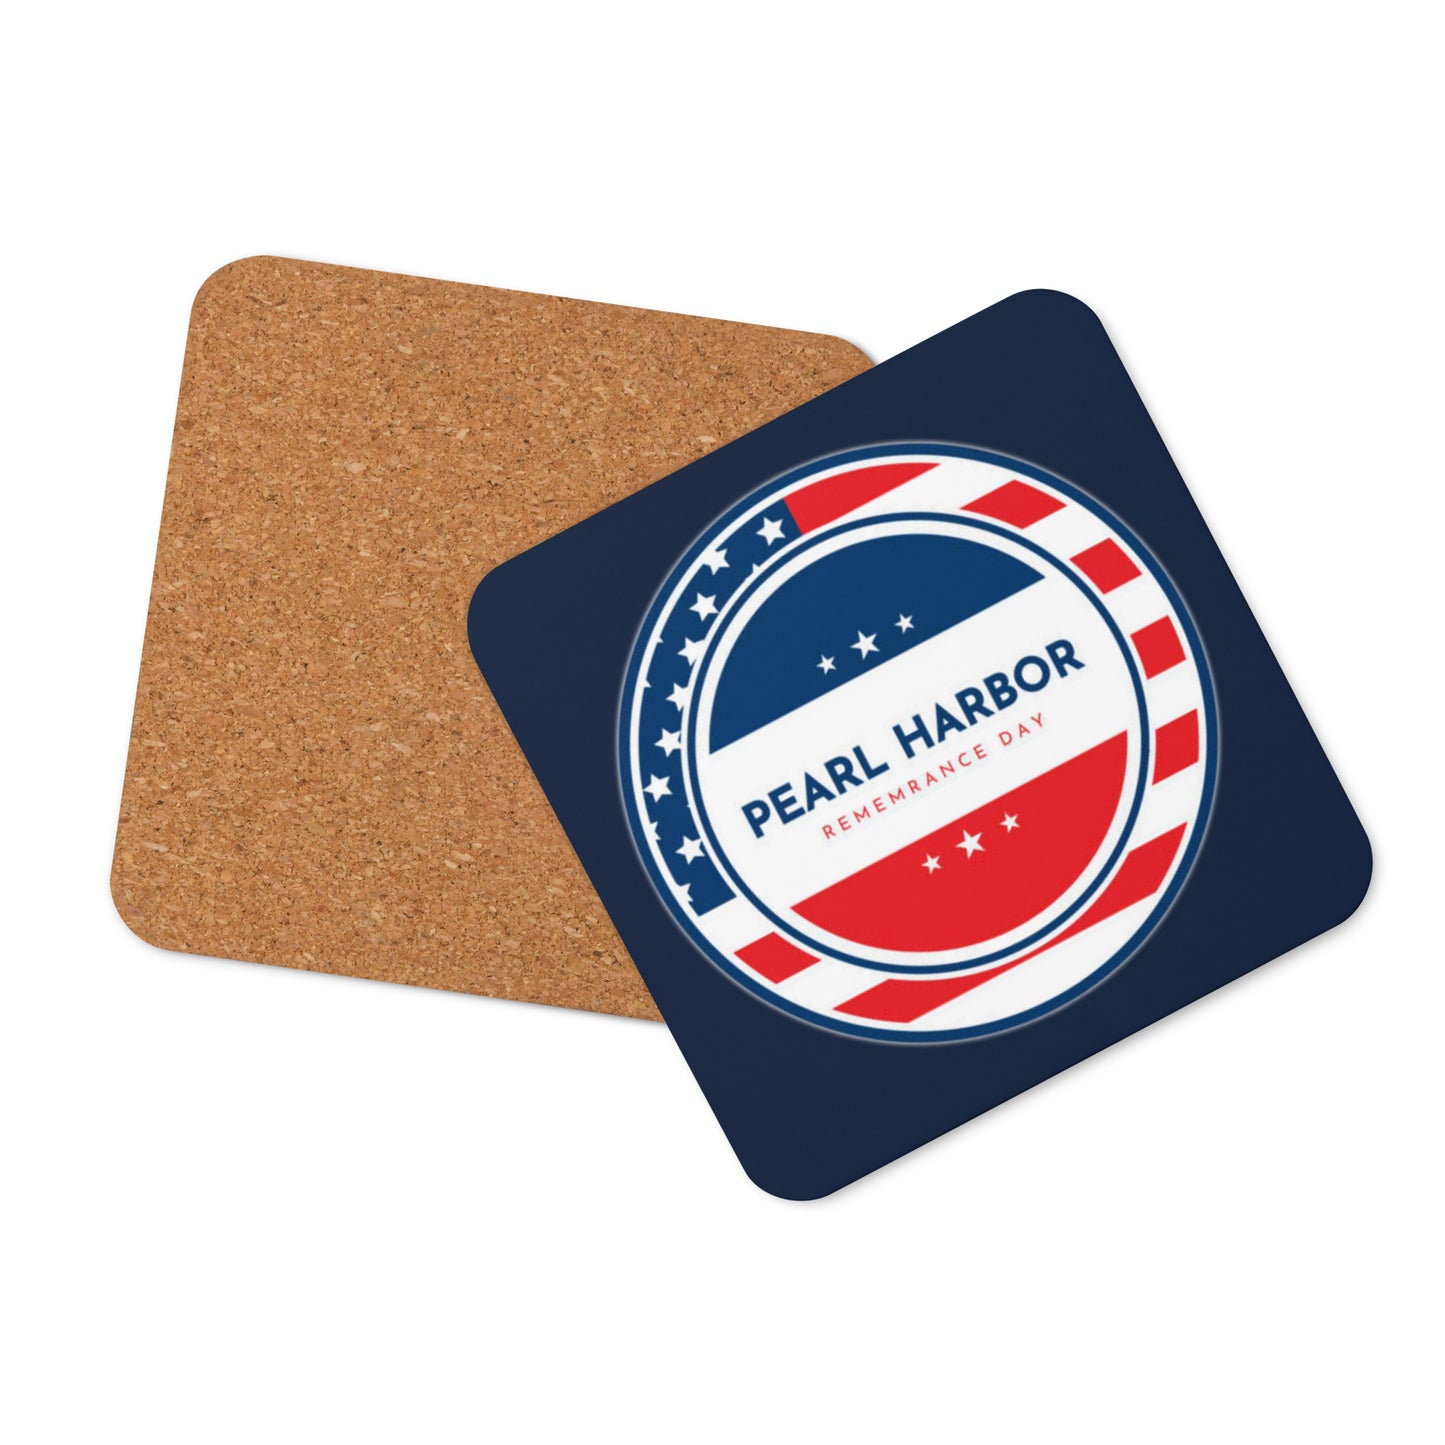 Cork-back coaster - Pearl Harbor Remembrance Day (Navy)